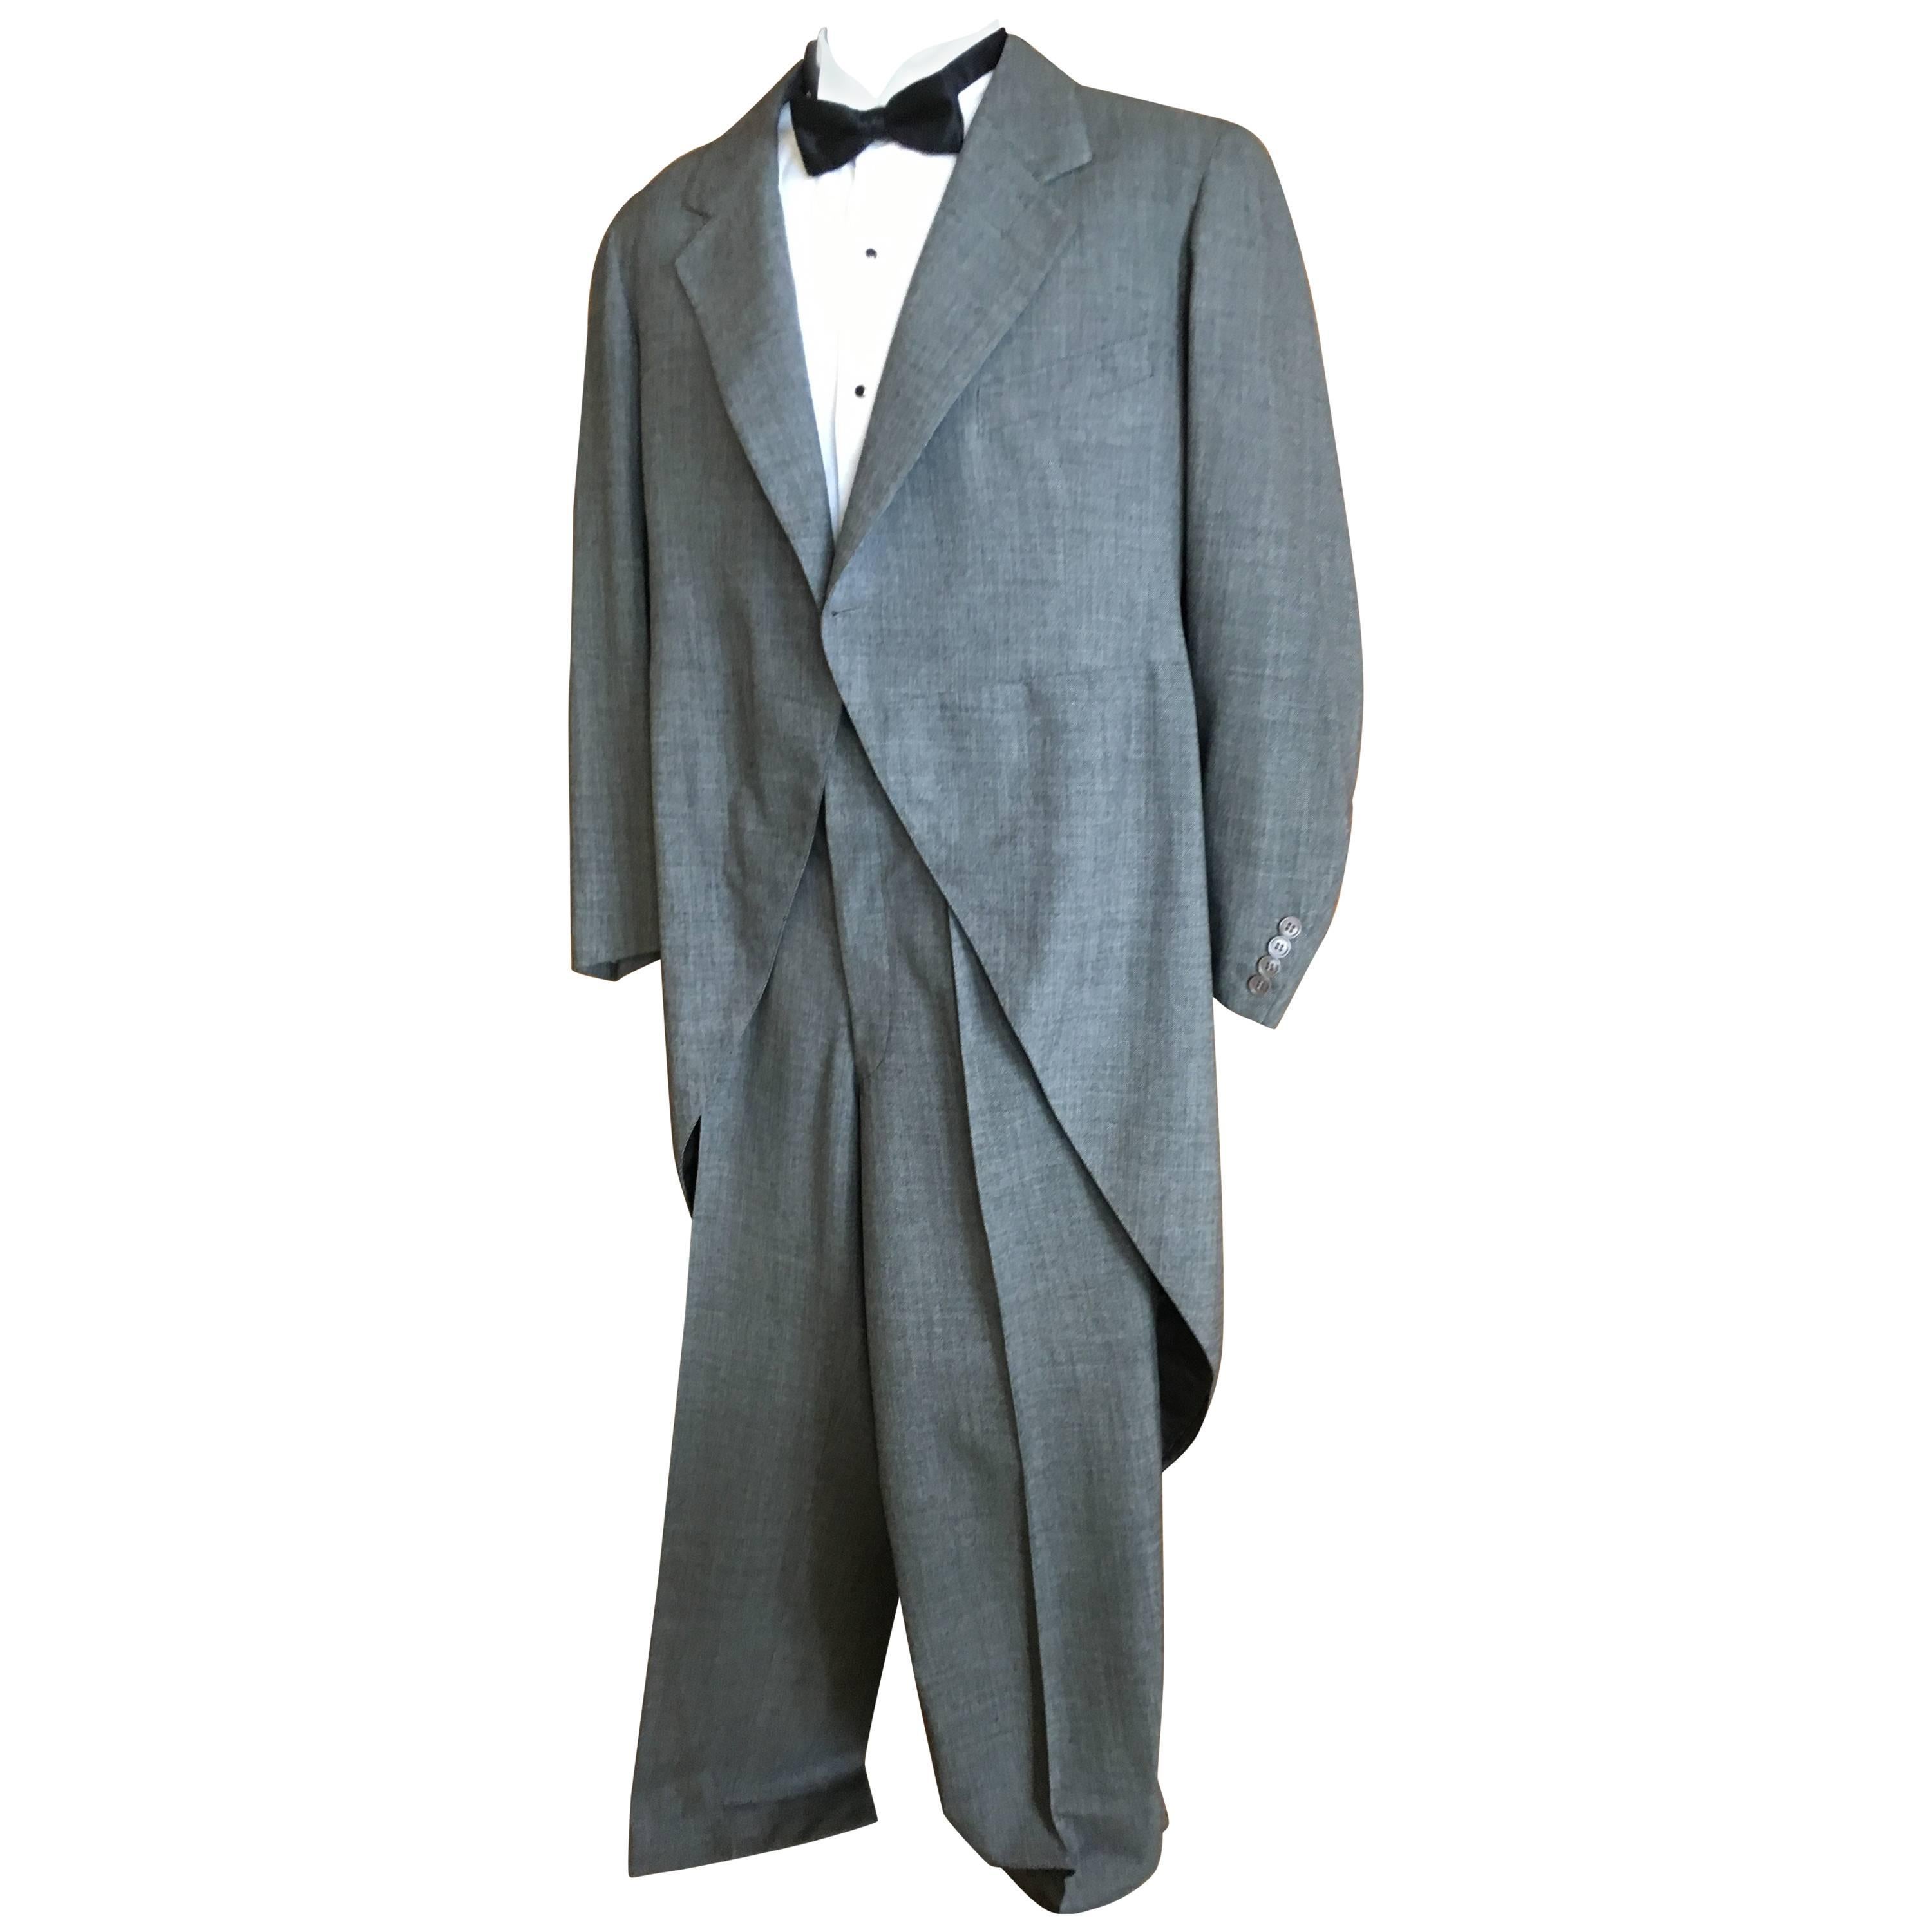 1941 Men's Gray Formal Cutaway Tailcoat Suit Dunne & Co.